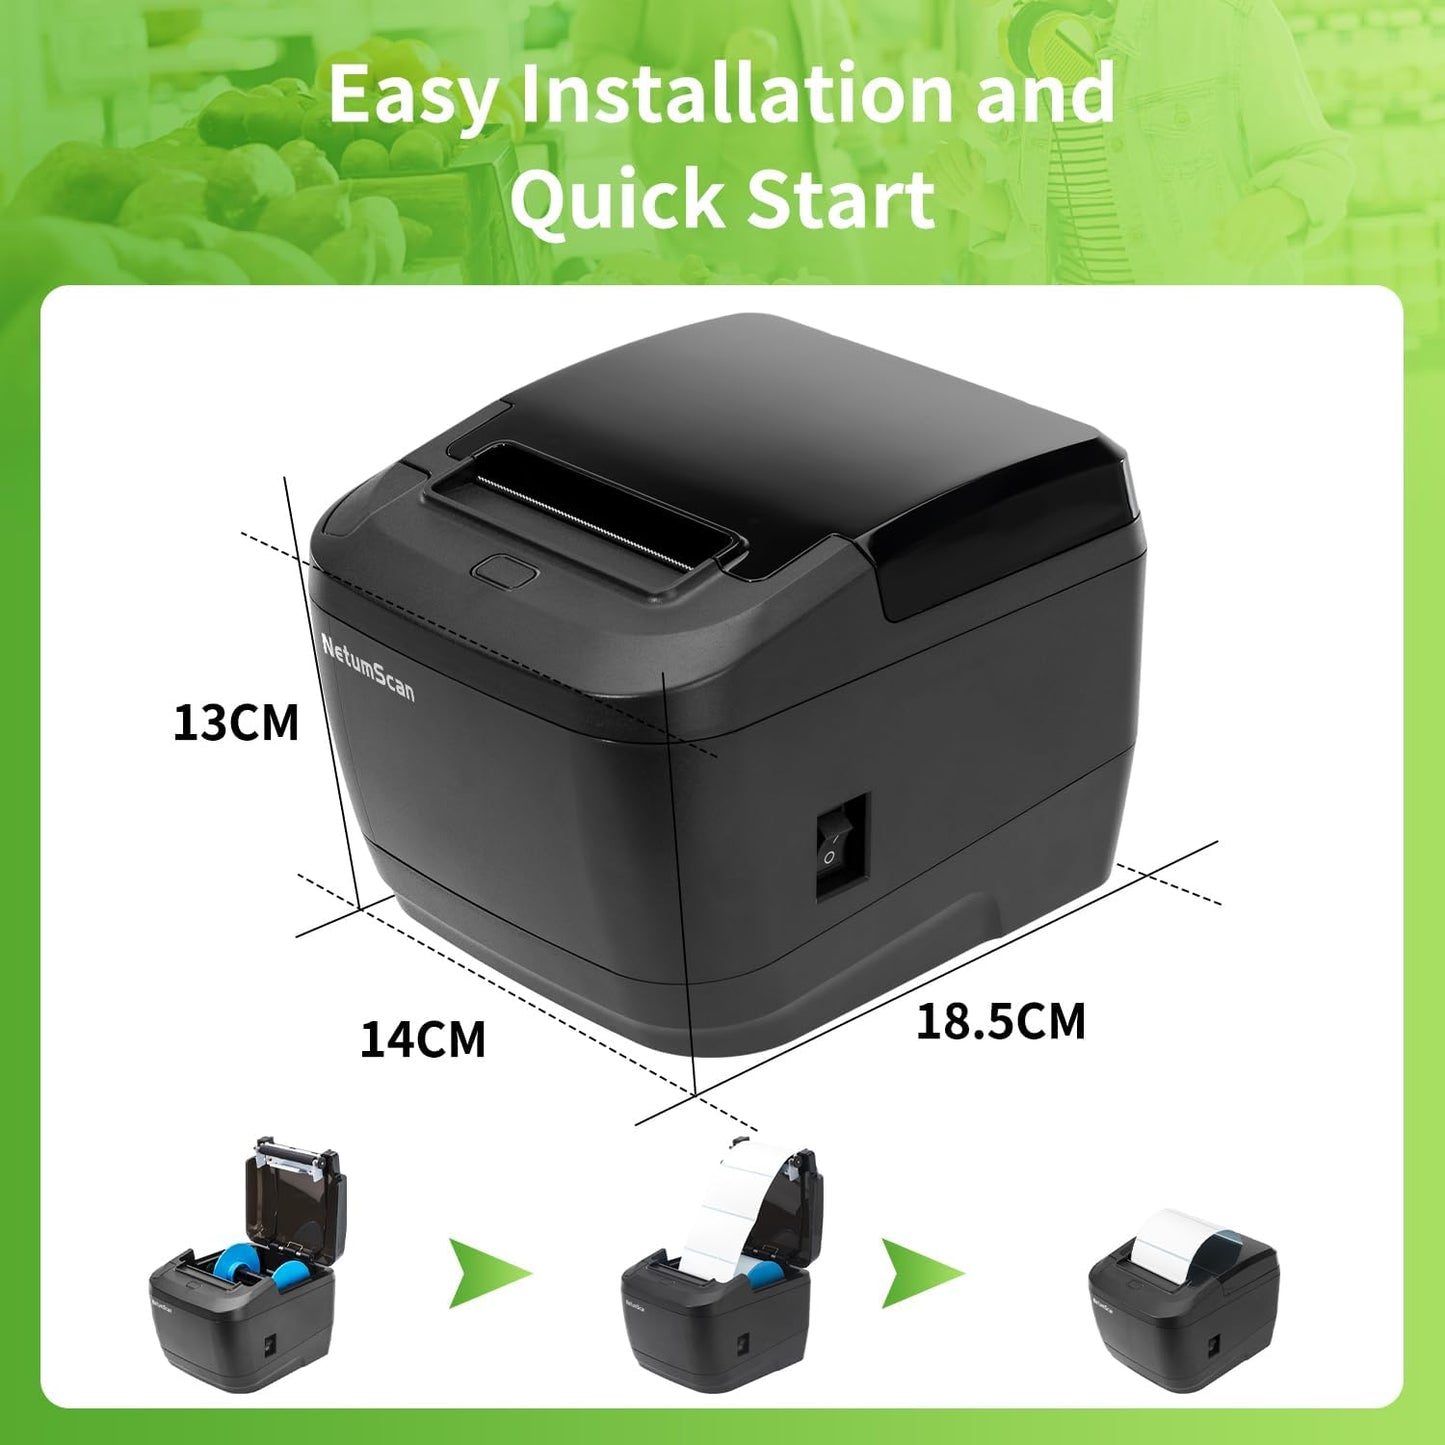 80mm Thermal Receipt Printer, USB POS Printer with Auto Cutter Cash Drawer, USB Serial Ethernet Interface Support Windows/Mac/Linux, Restaurant Kitchen Printer for ESC/POS